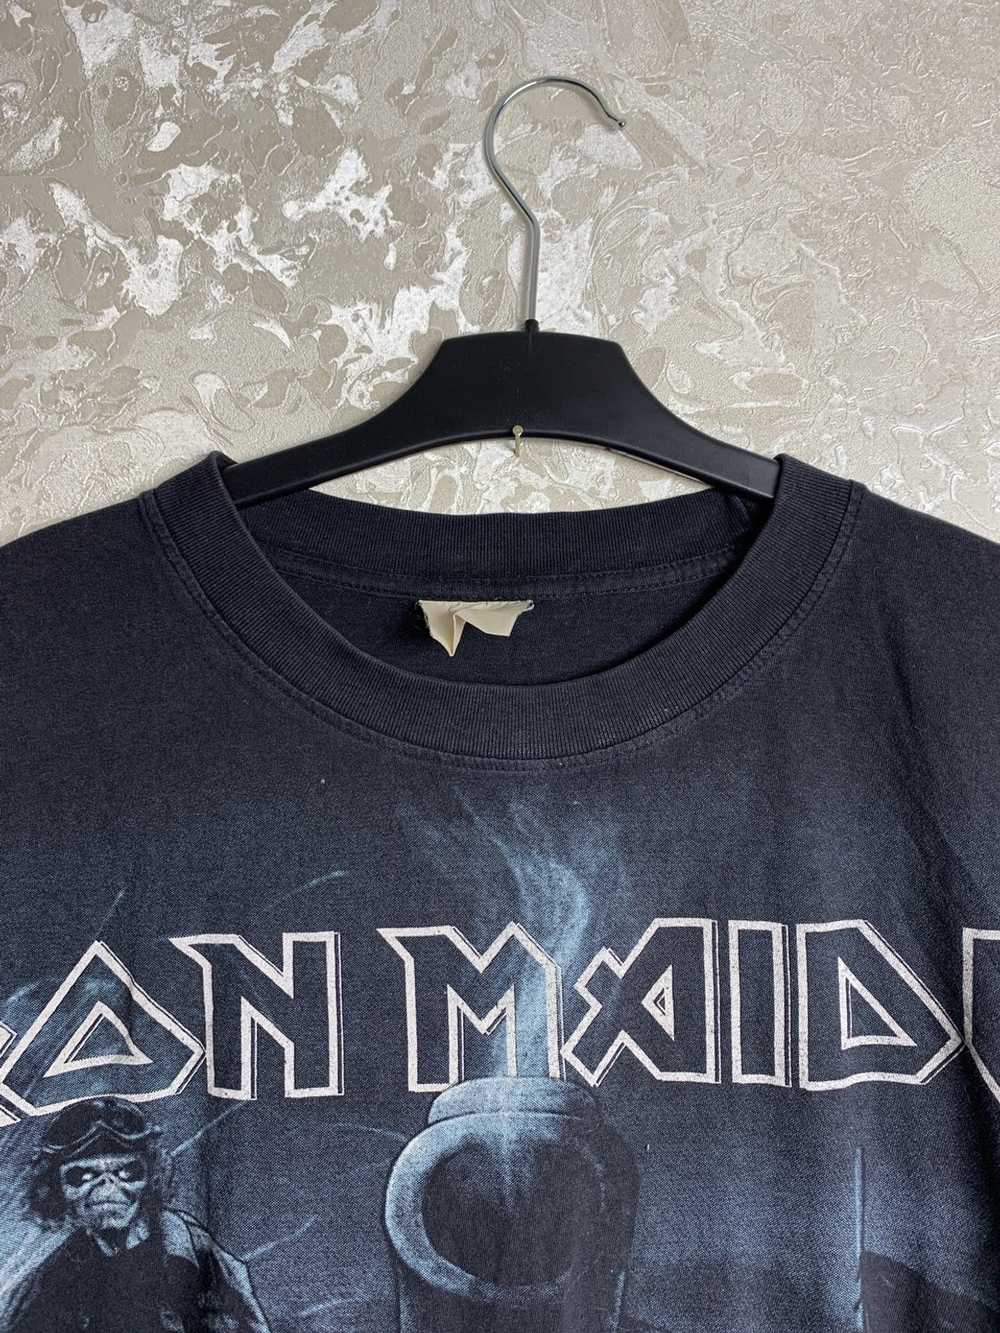 Band Tees × Iron Maiden × Vintage Vintage over pr… - image 3